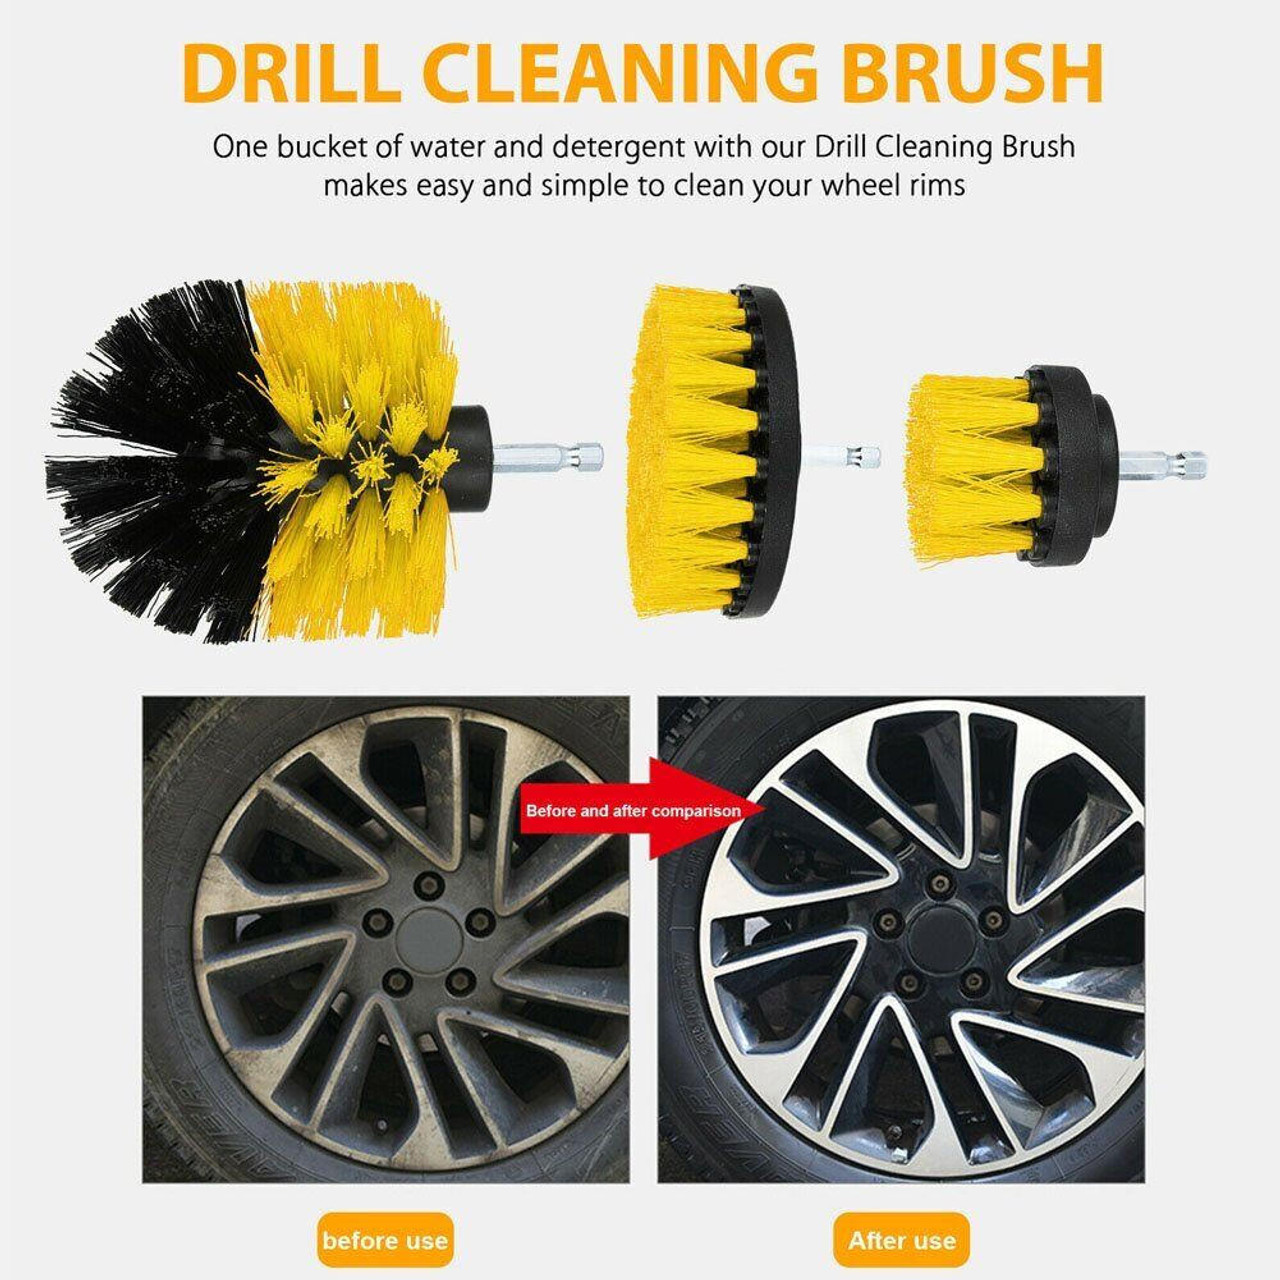 https://cdn11.bigcommerce.com/s-zrh8tkpr8d/images/stencil/1280x1280/products/10076/31391/1221-pcs-electric-drill-brush-attachment-set-cleaning-kit-power-scrubber-pads__40500.1675296151.jpg?c=2&imbypass=on